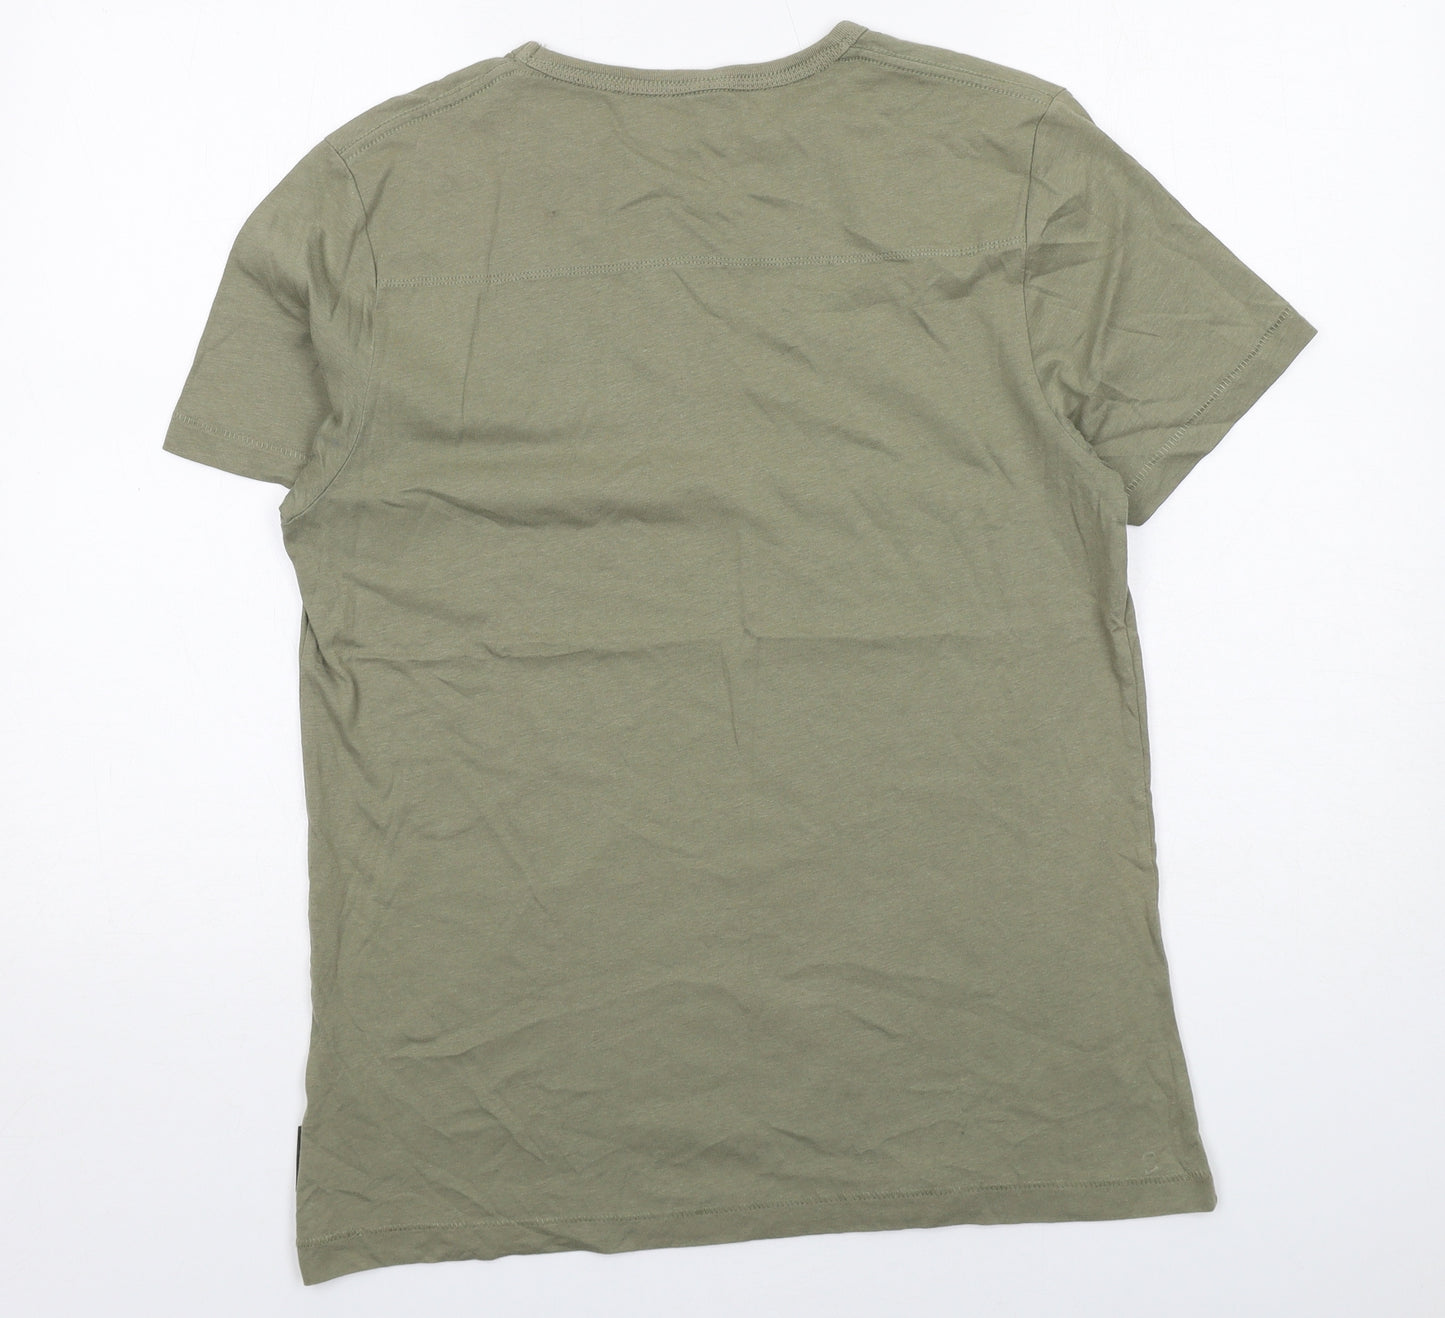 French Connection Mens Green Cotton T-Shirt Size L Round Neck